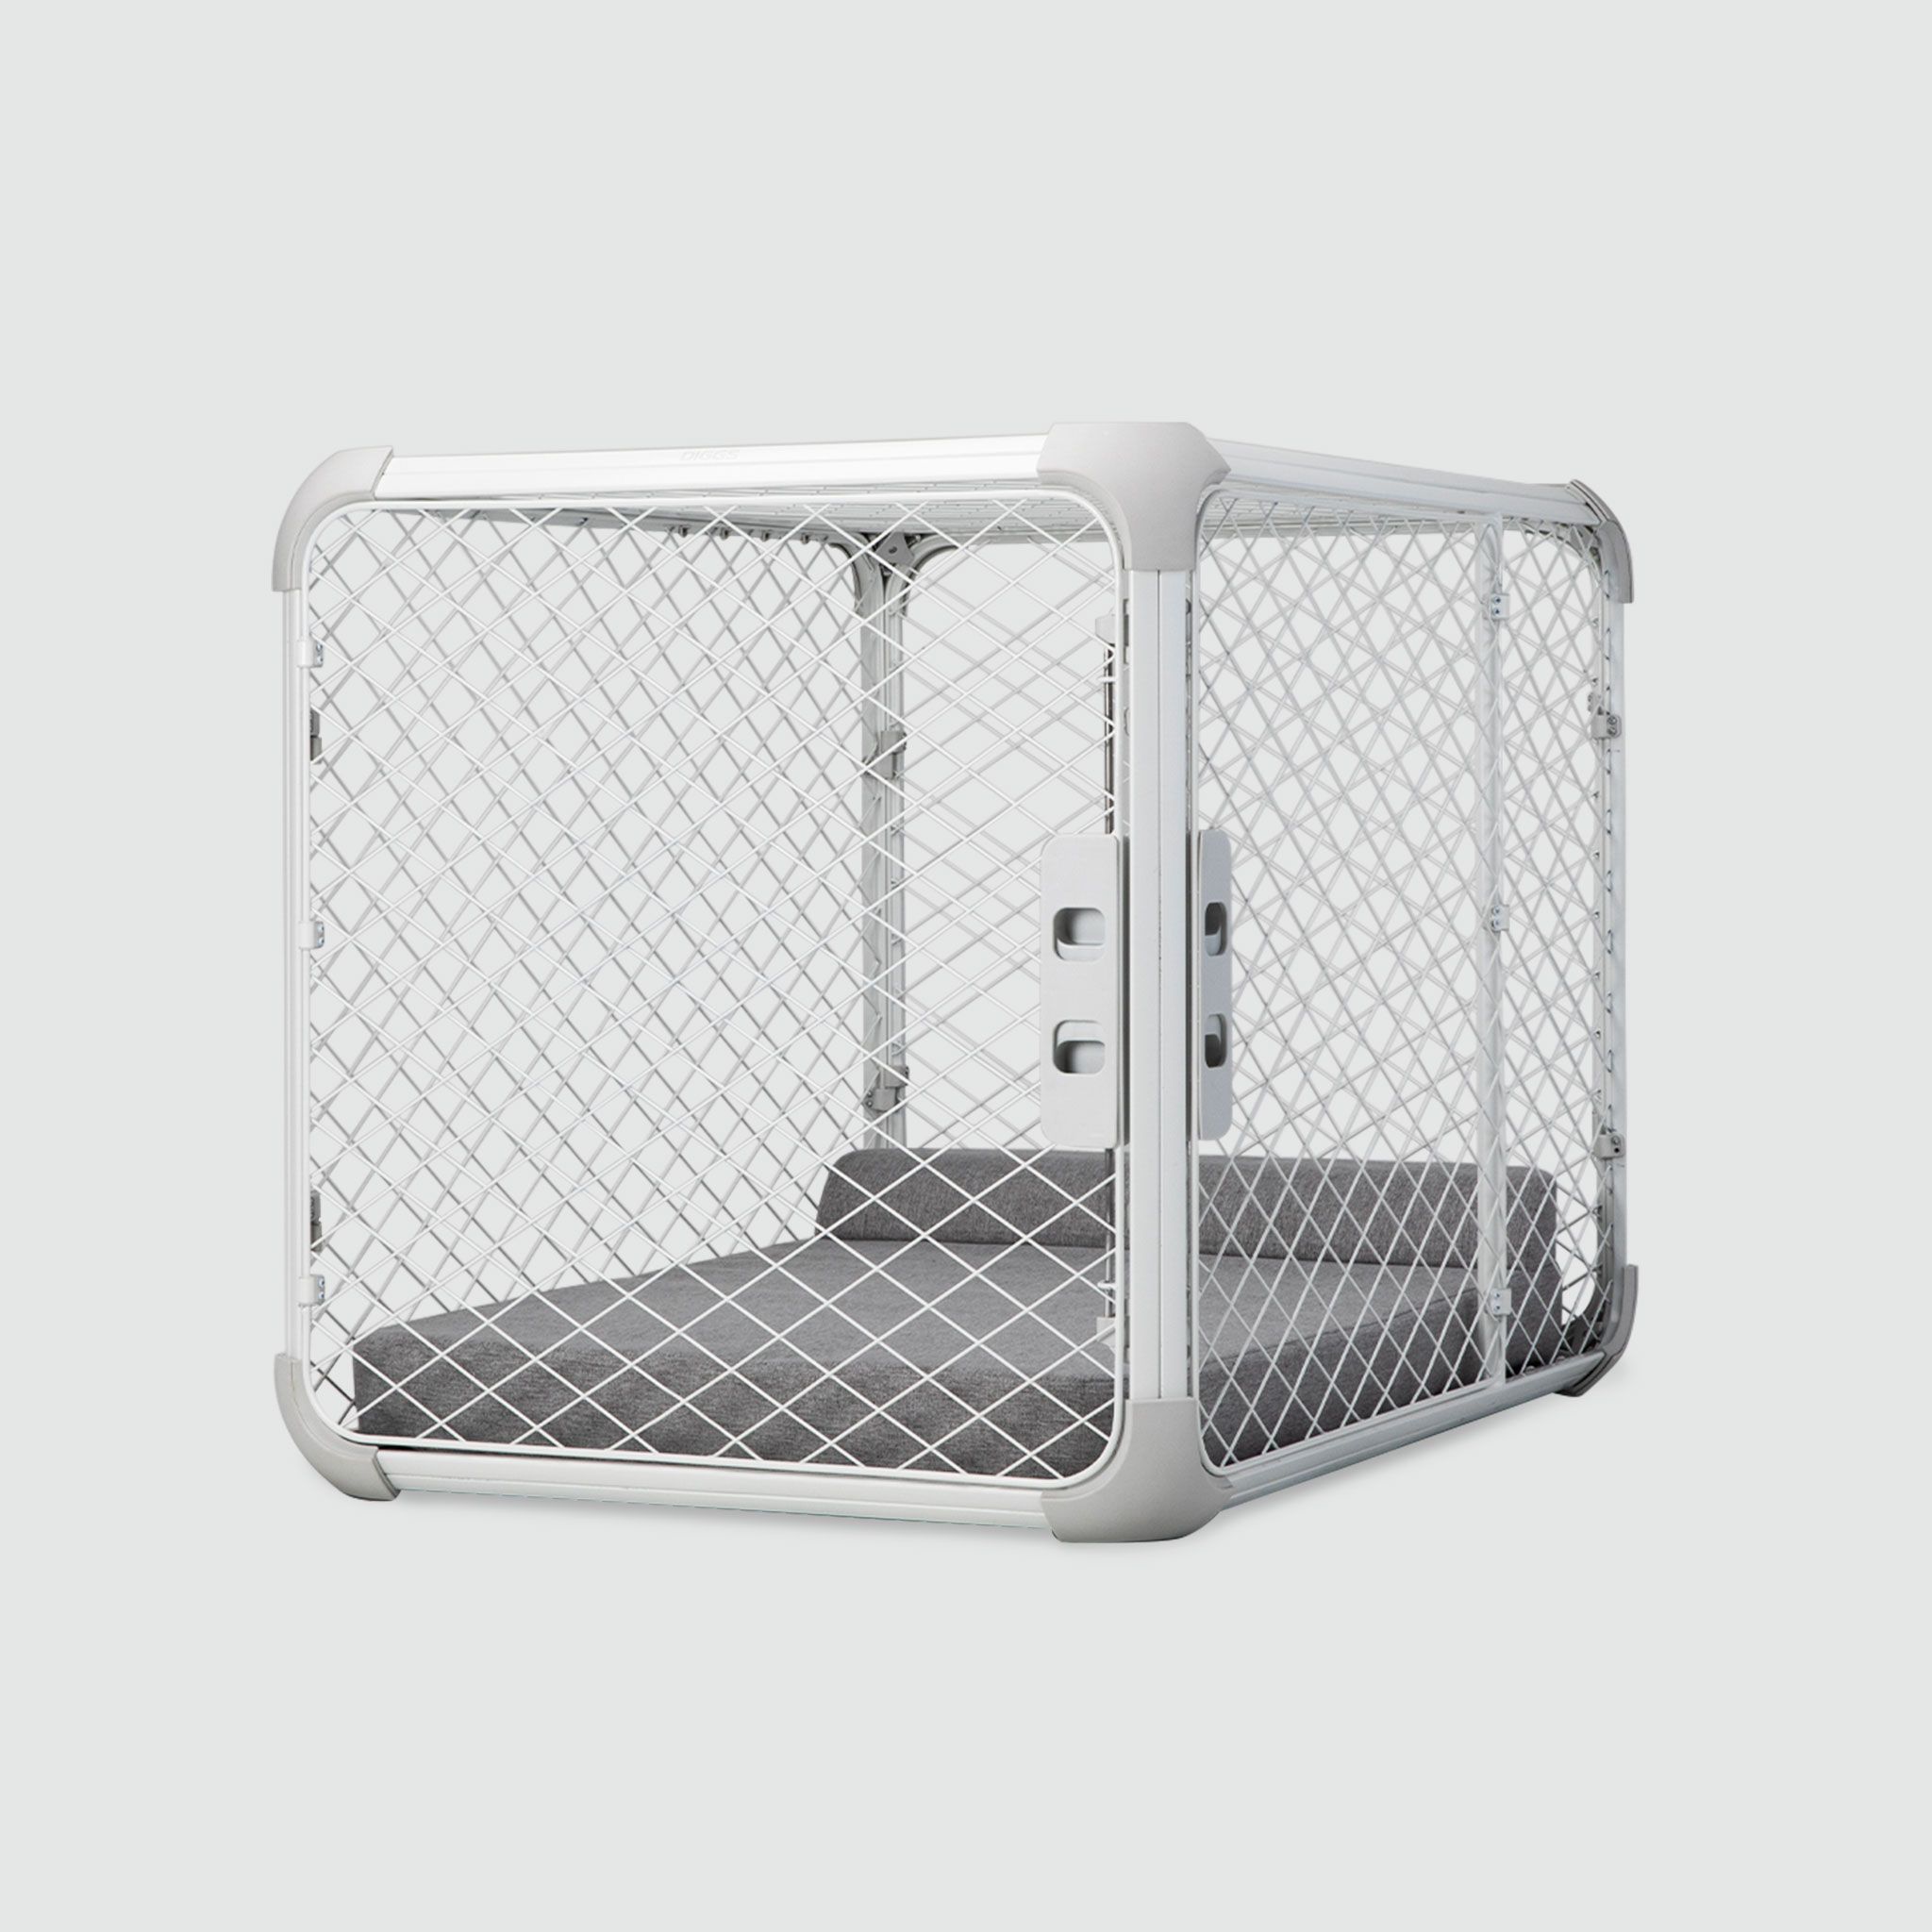 A white metal dog crate with a dog bed inside of it